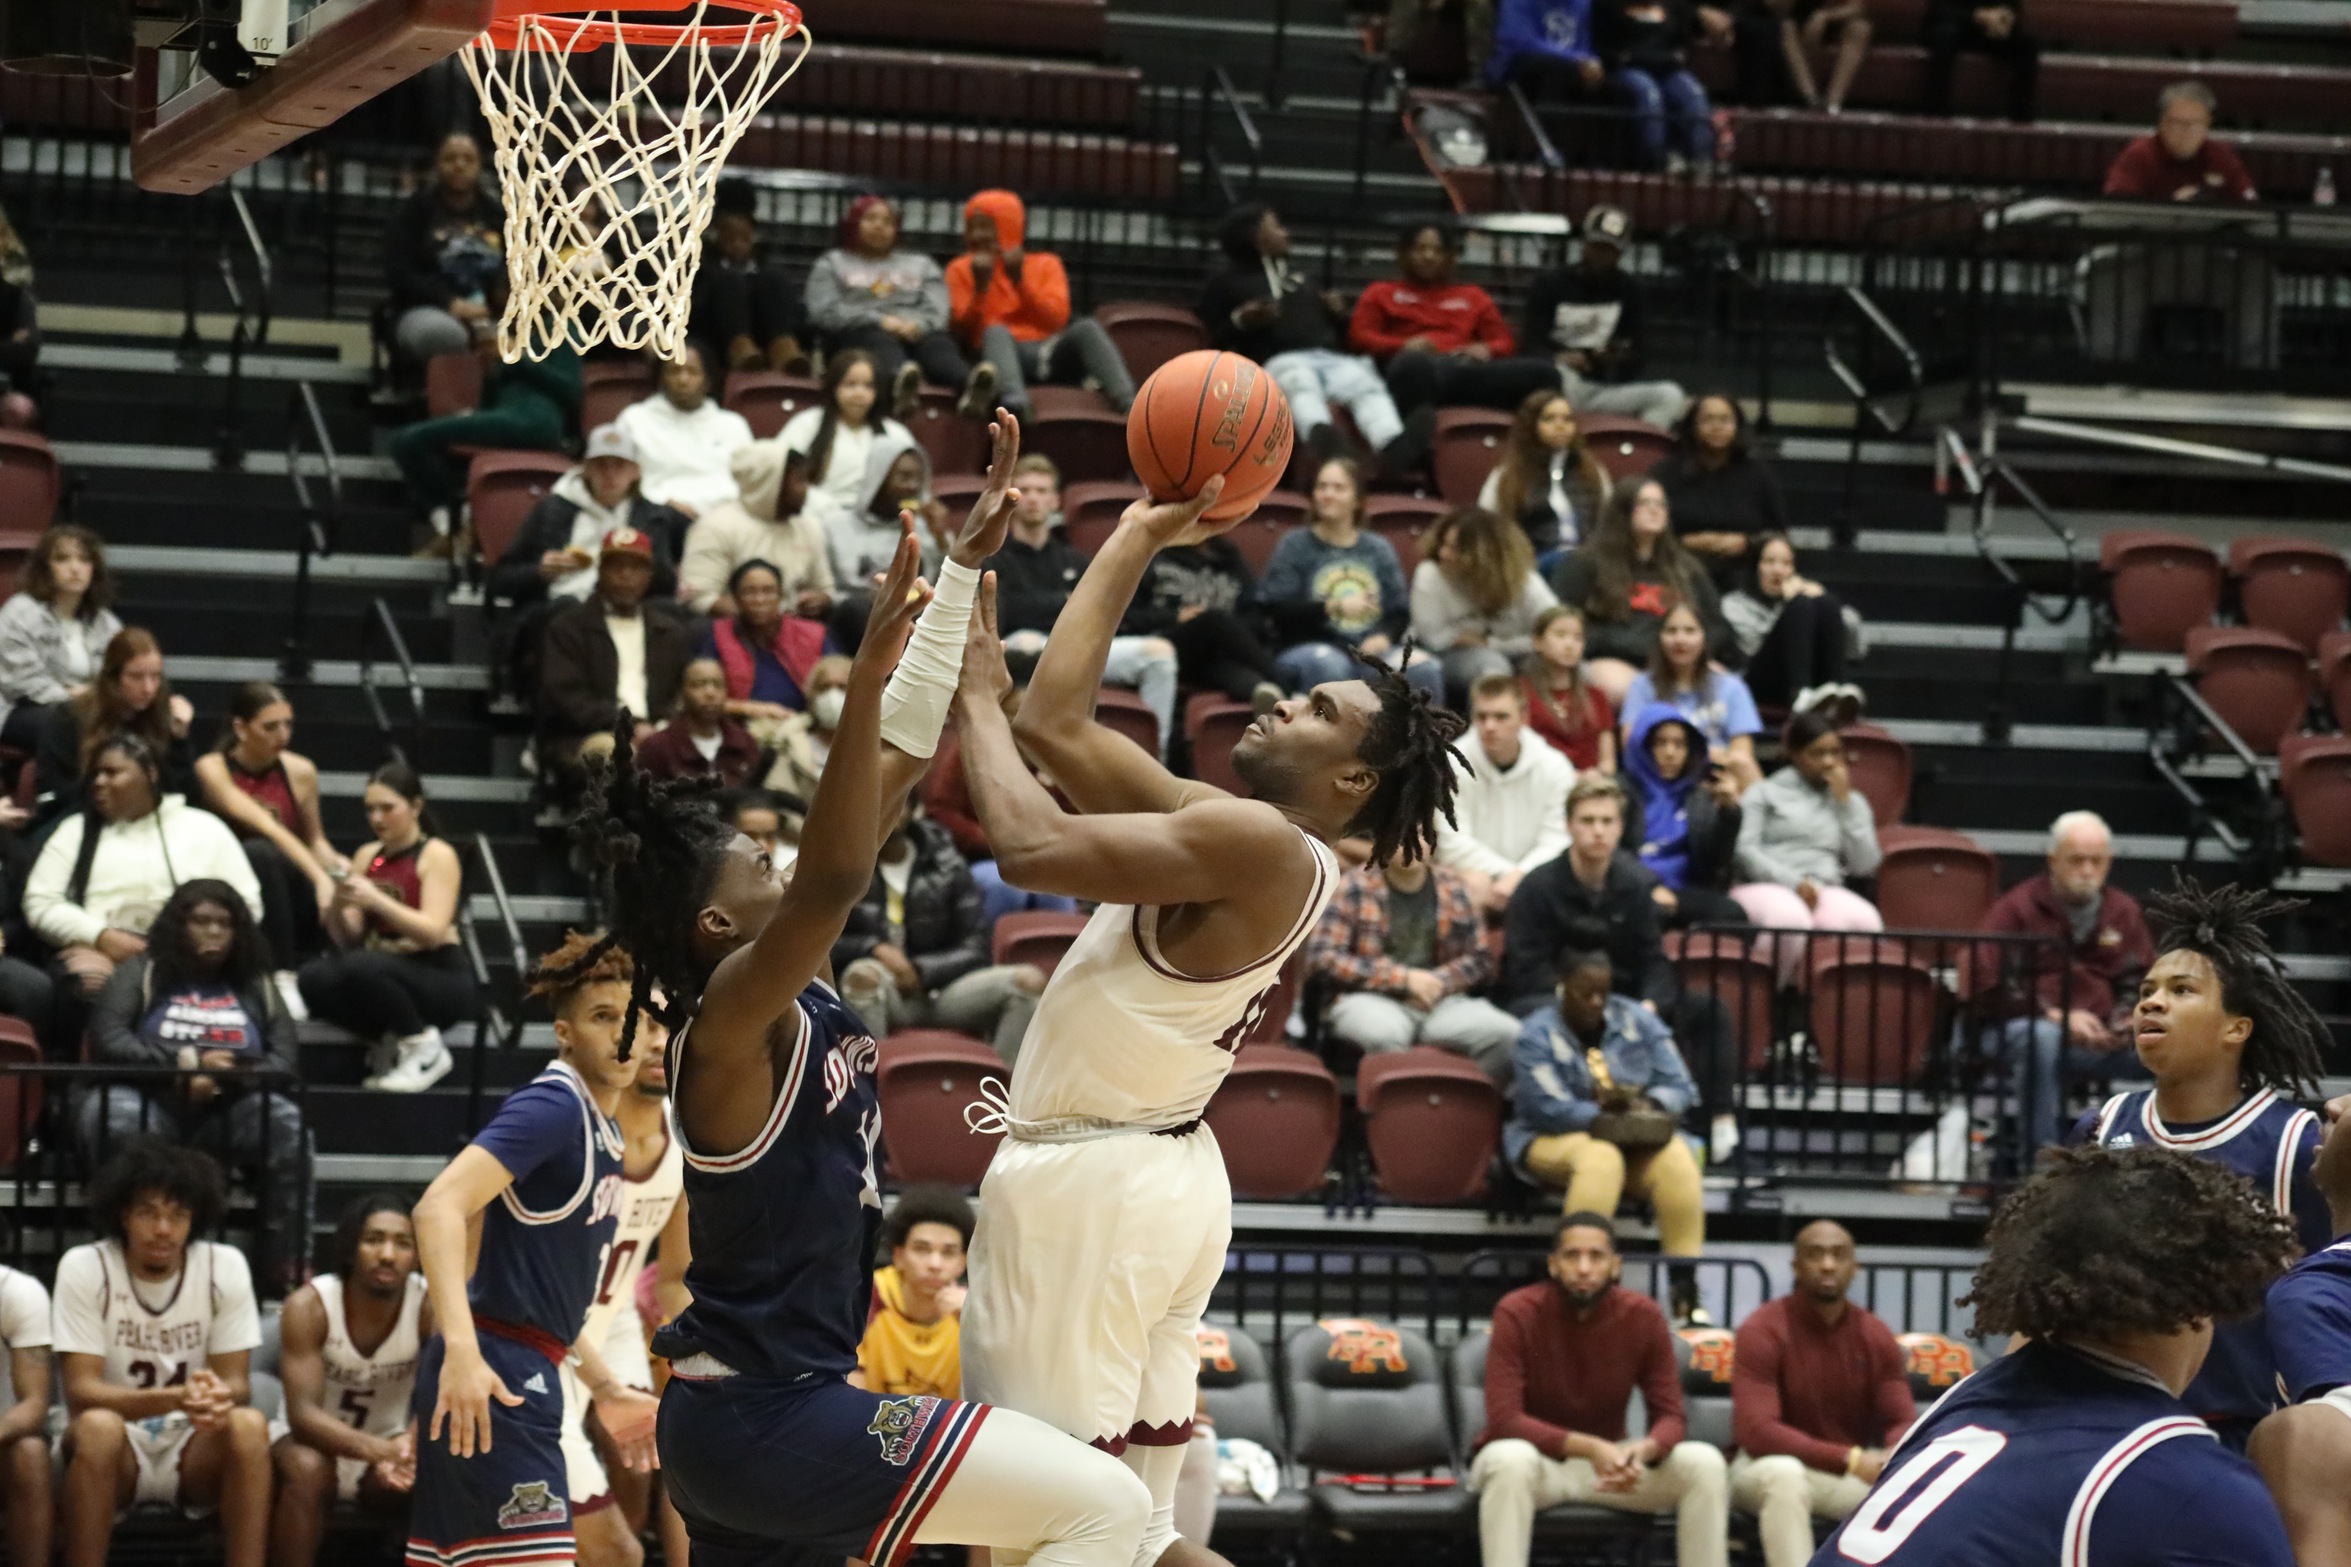 Pearl River wins big over Southwest in return to Marvin R. White Coliseum